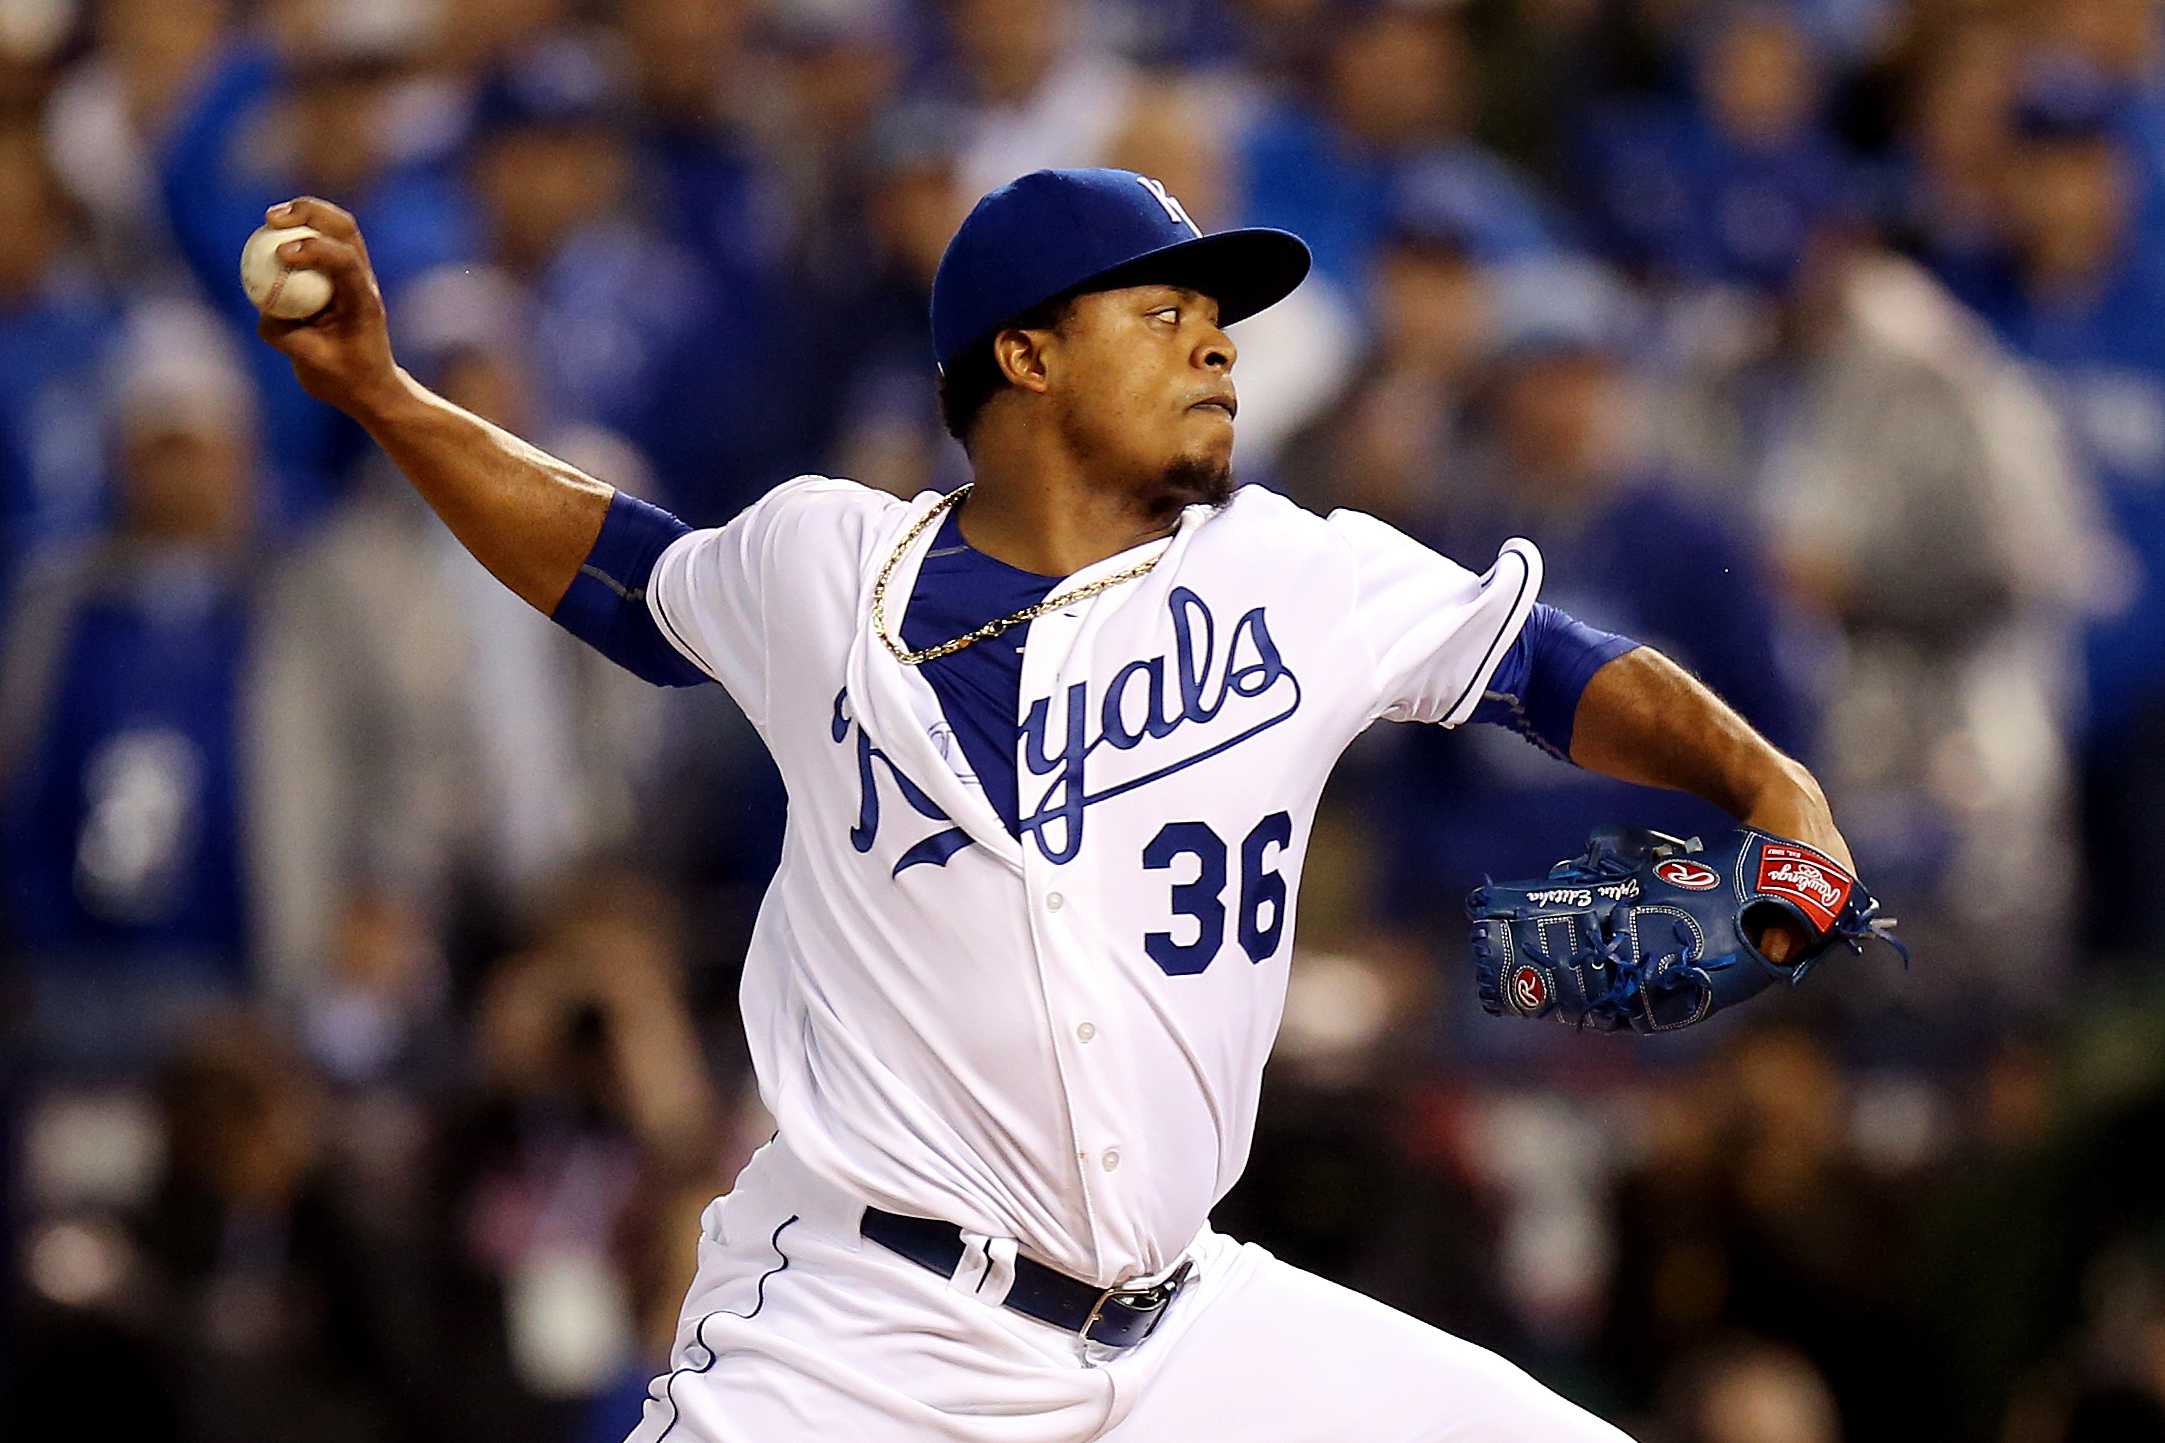 Edinson Volquez of the Kansas City Royals at the World Series playing against the New York Mets in Kansas City, Miss. on Oct. 27, 2015. (Brad Mangin—MLB Photos via Getty Images)